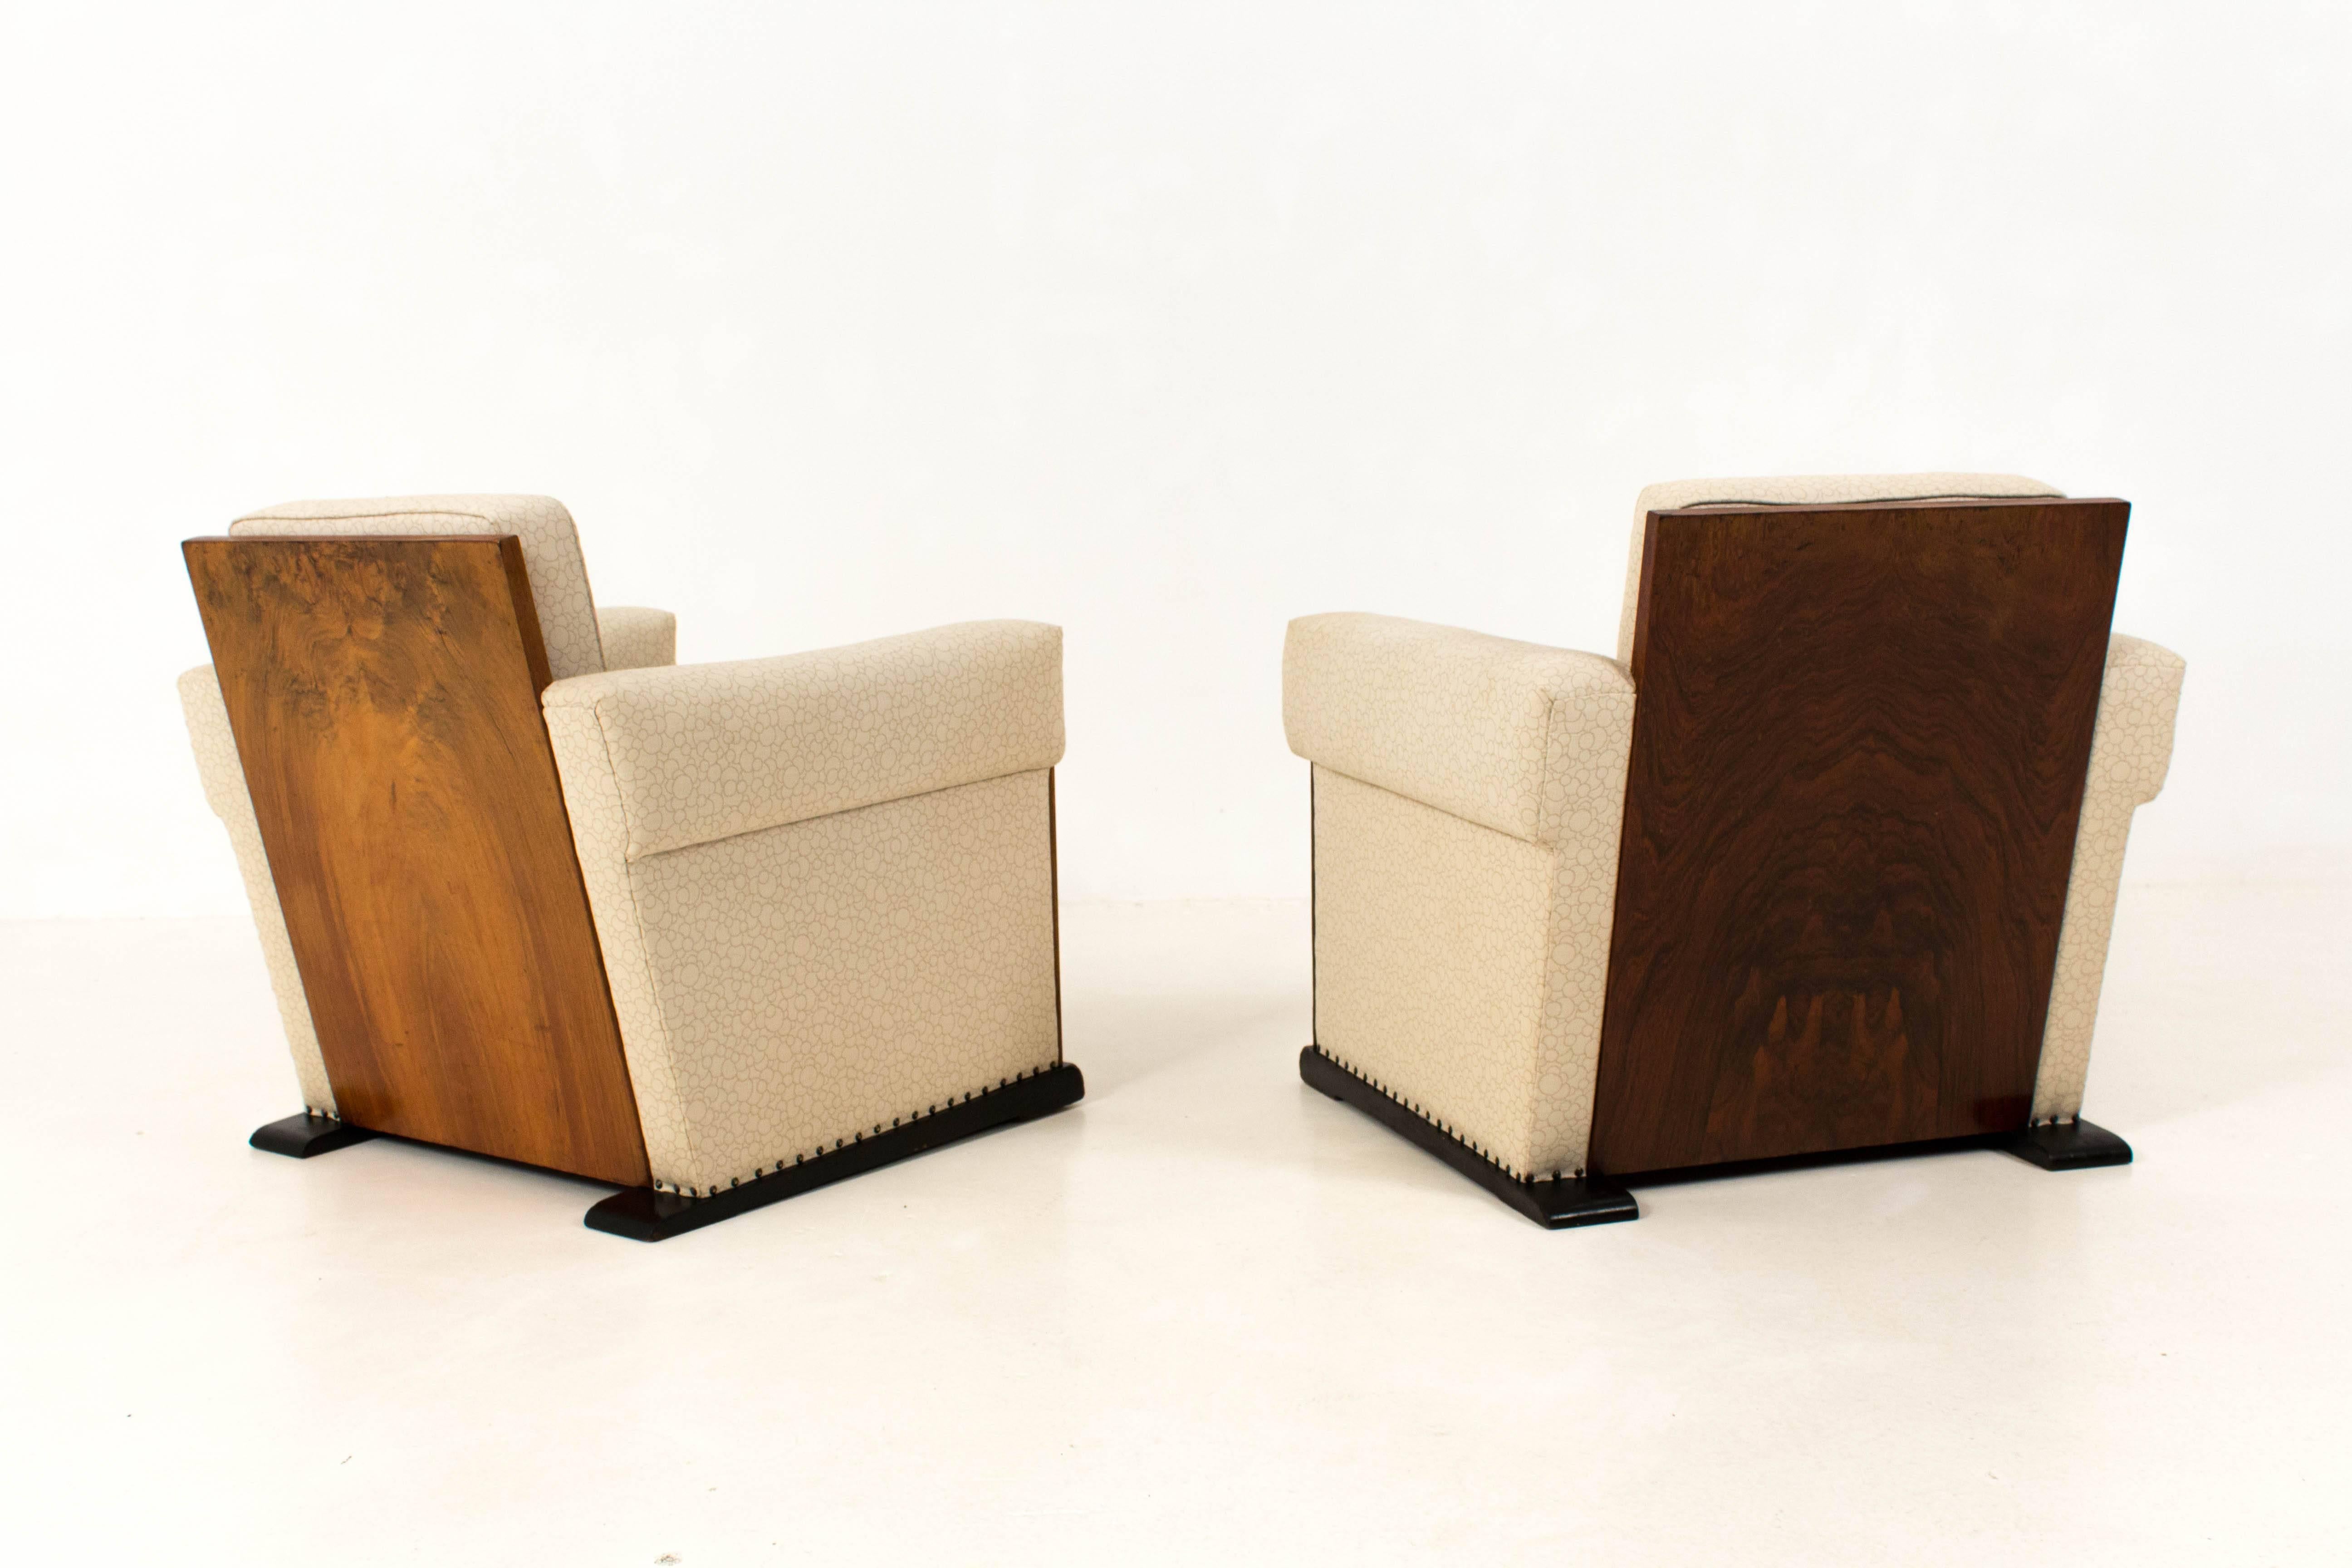 Pair of Art Deco Haagse School Club Chairs and Coffee Table by Paul Bromberg 1